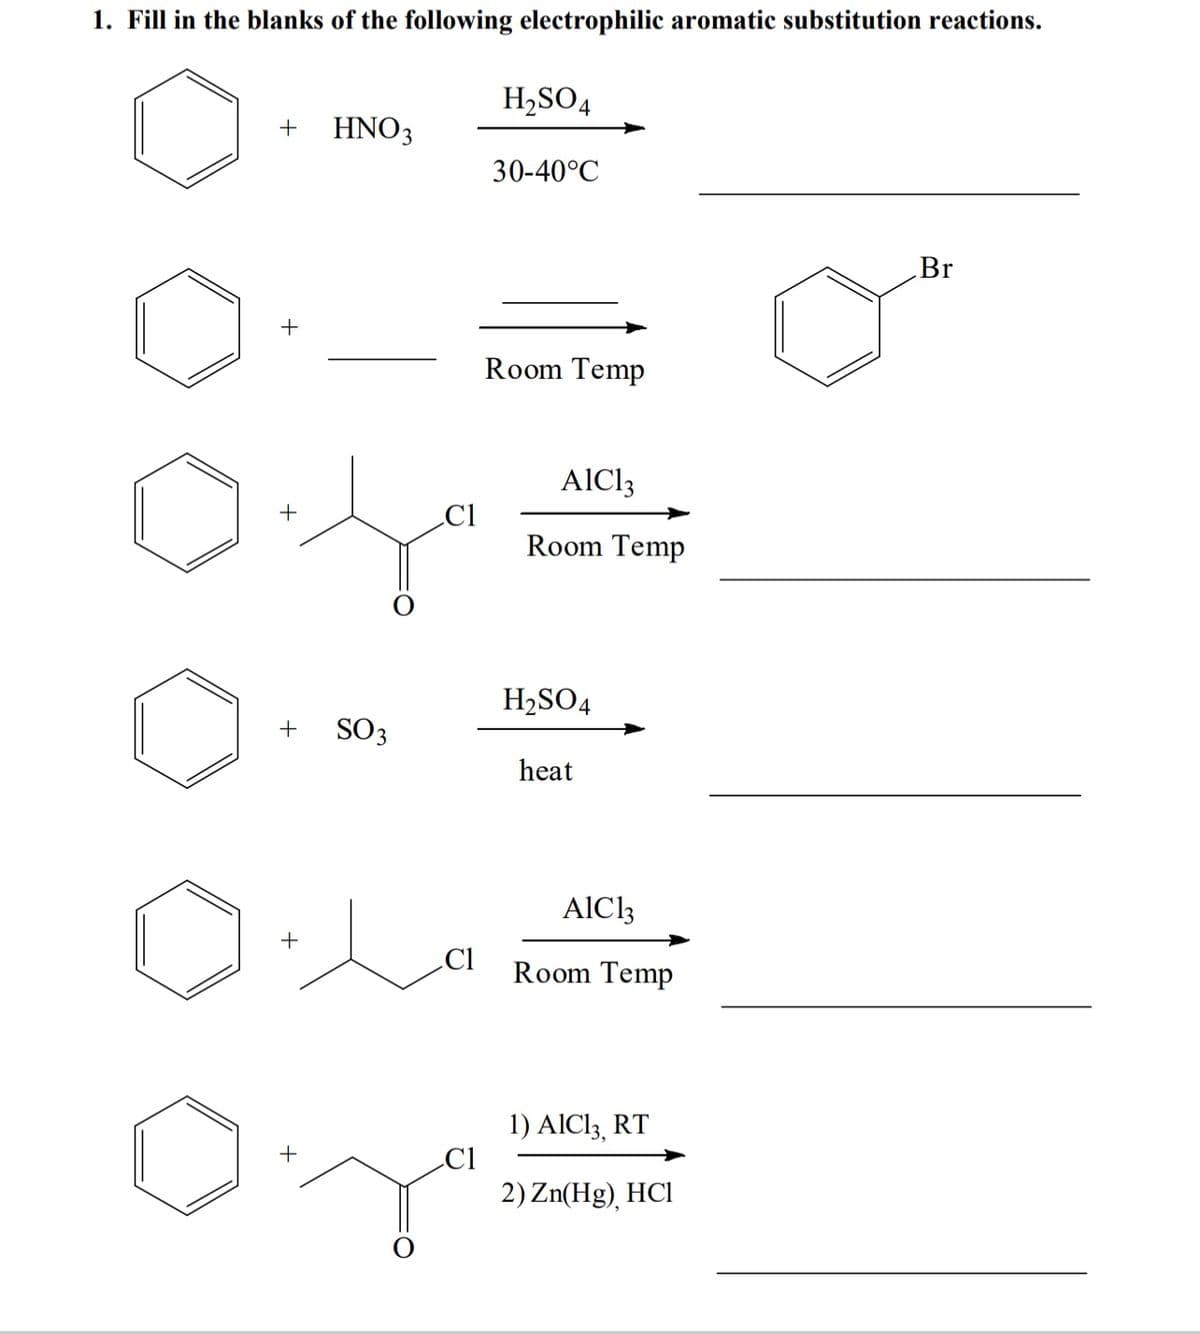 1. Fill in the blanks of the following electrophilic aromatic substitution reactions.
H,SO4
+
HNO3
30-40°C
Br
+
Room Temp
AIC13
Room Temp
H2SO4
SO3
heat
AIC13
+
Cl
Room Temp
1) AIC13, RT
Cl
2) Zn(Hg), HCl
